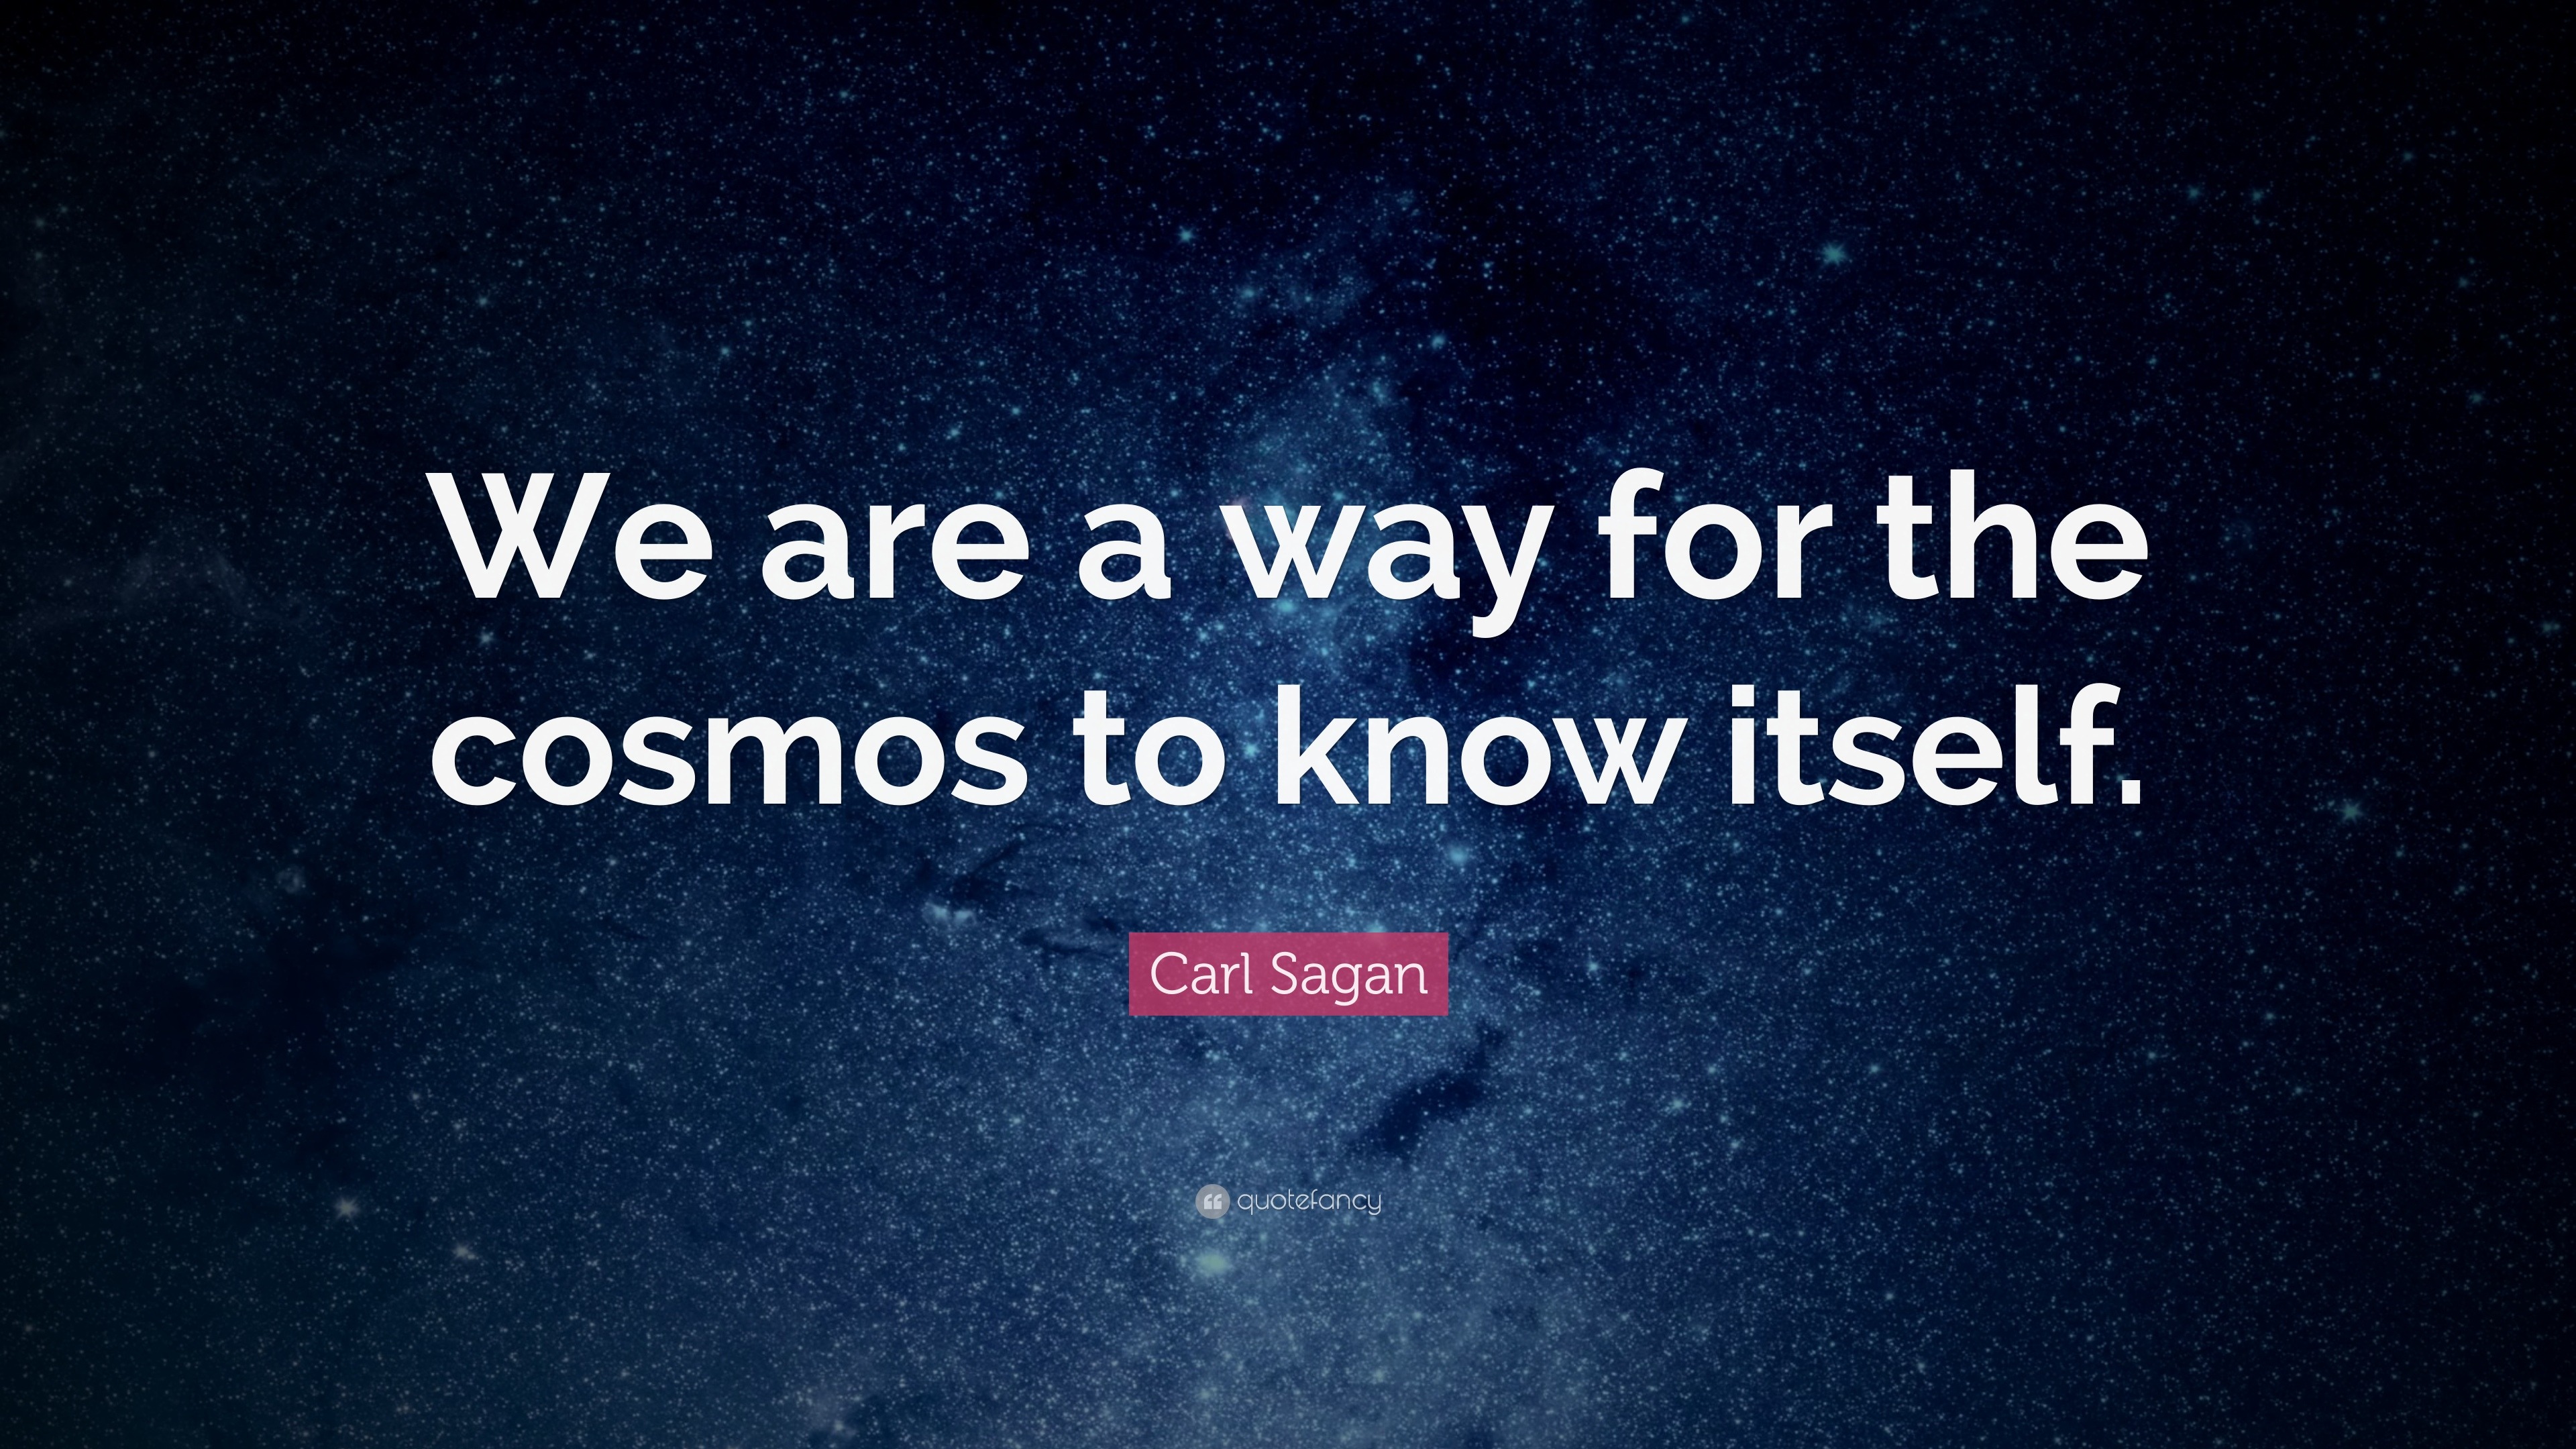 Carl Sagan Quote: “We are a way for the cosmos to know itself.”